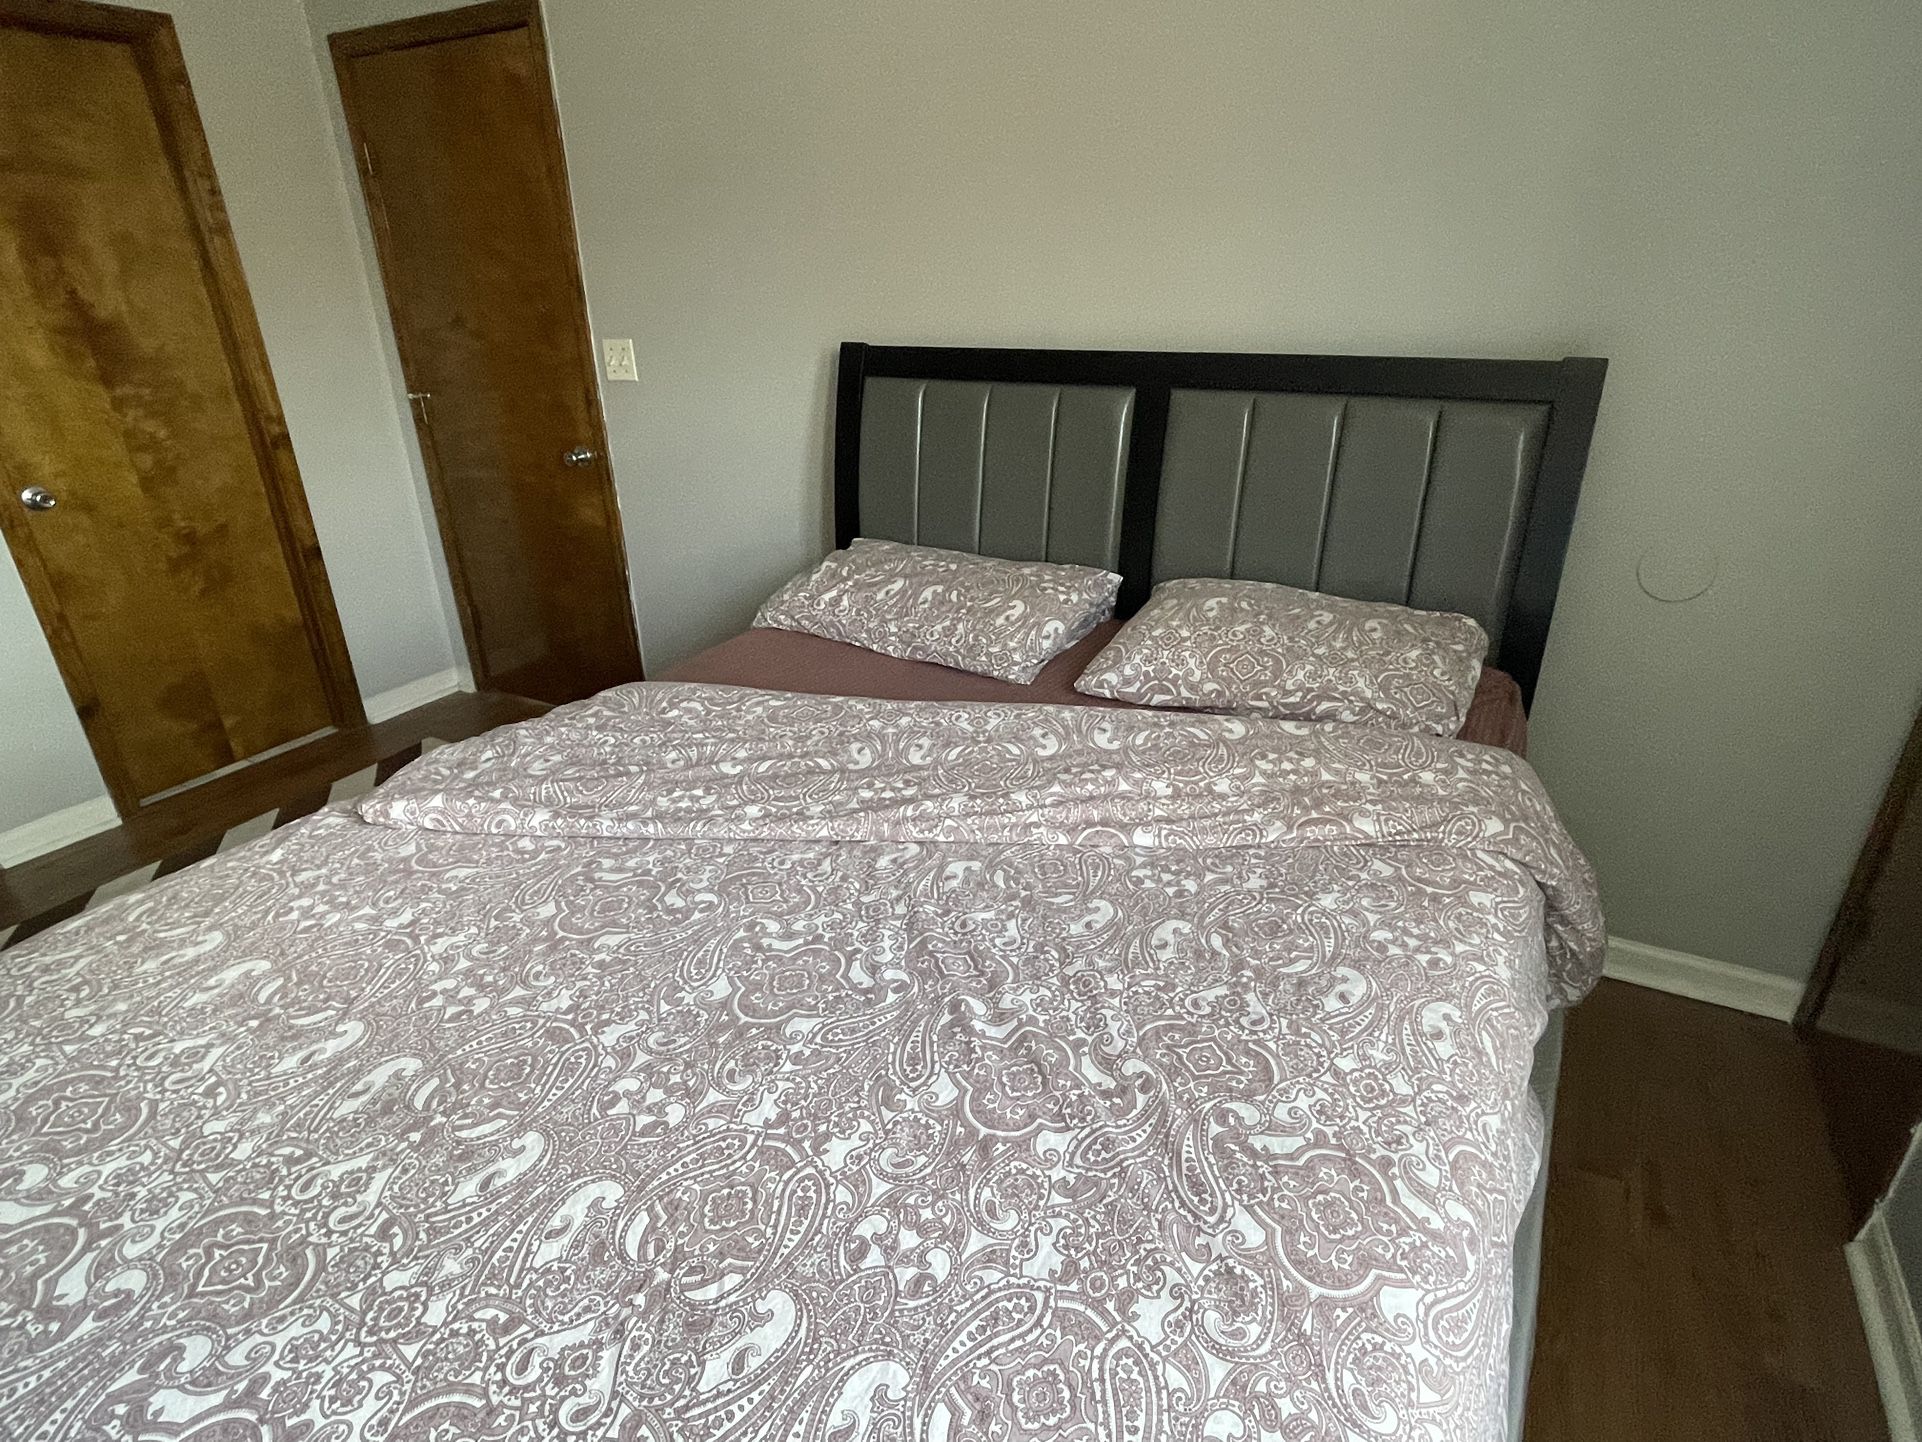 Brand New Queen mattress with spring box and frame